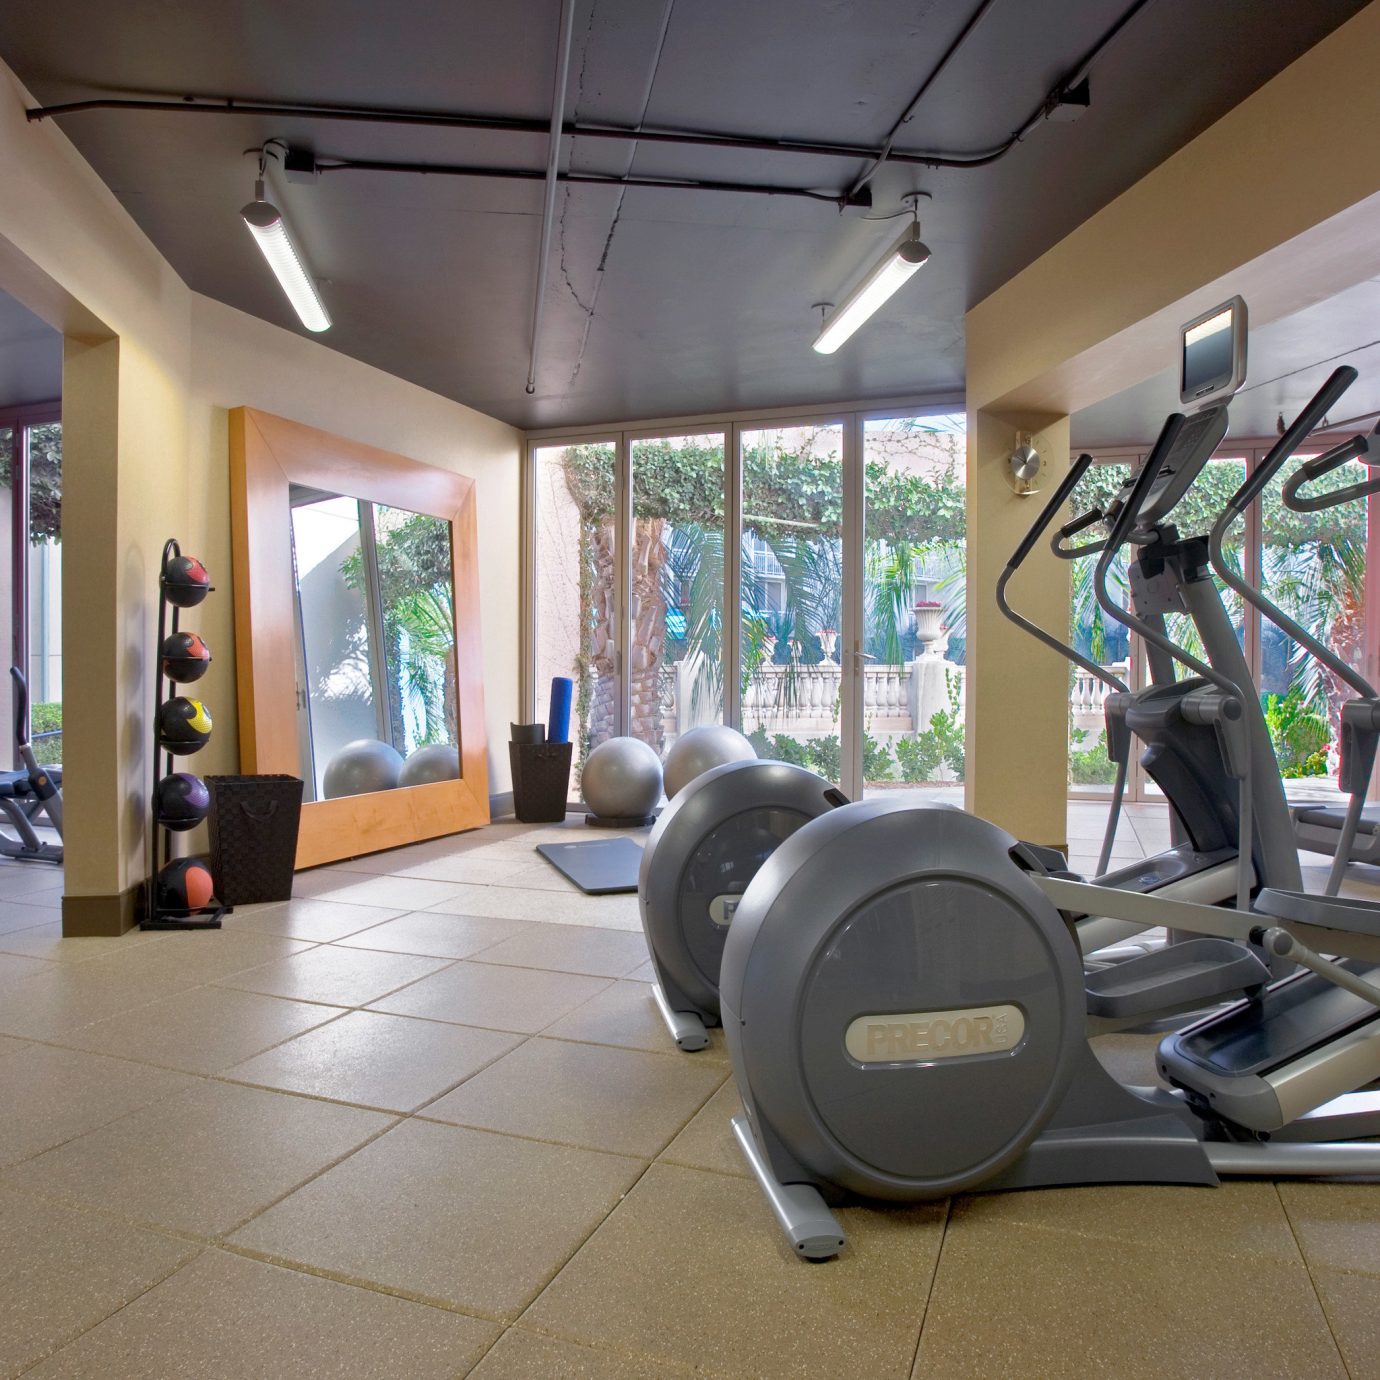 structure gym sport venue Sport leisure muscle physical fitness